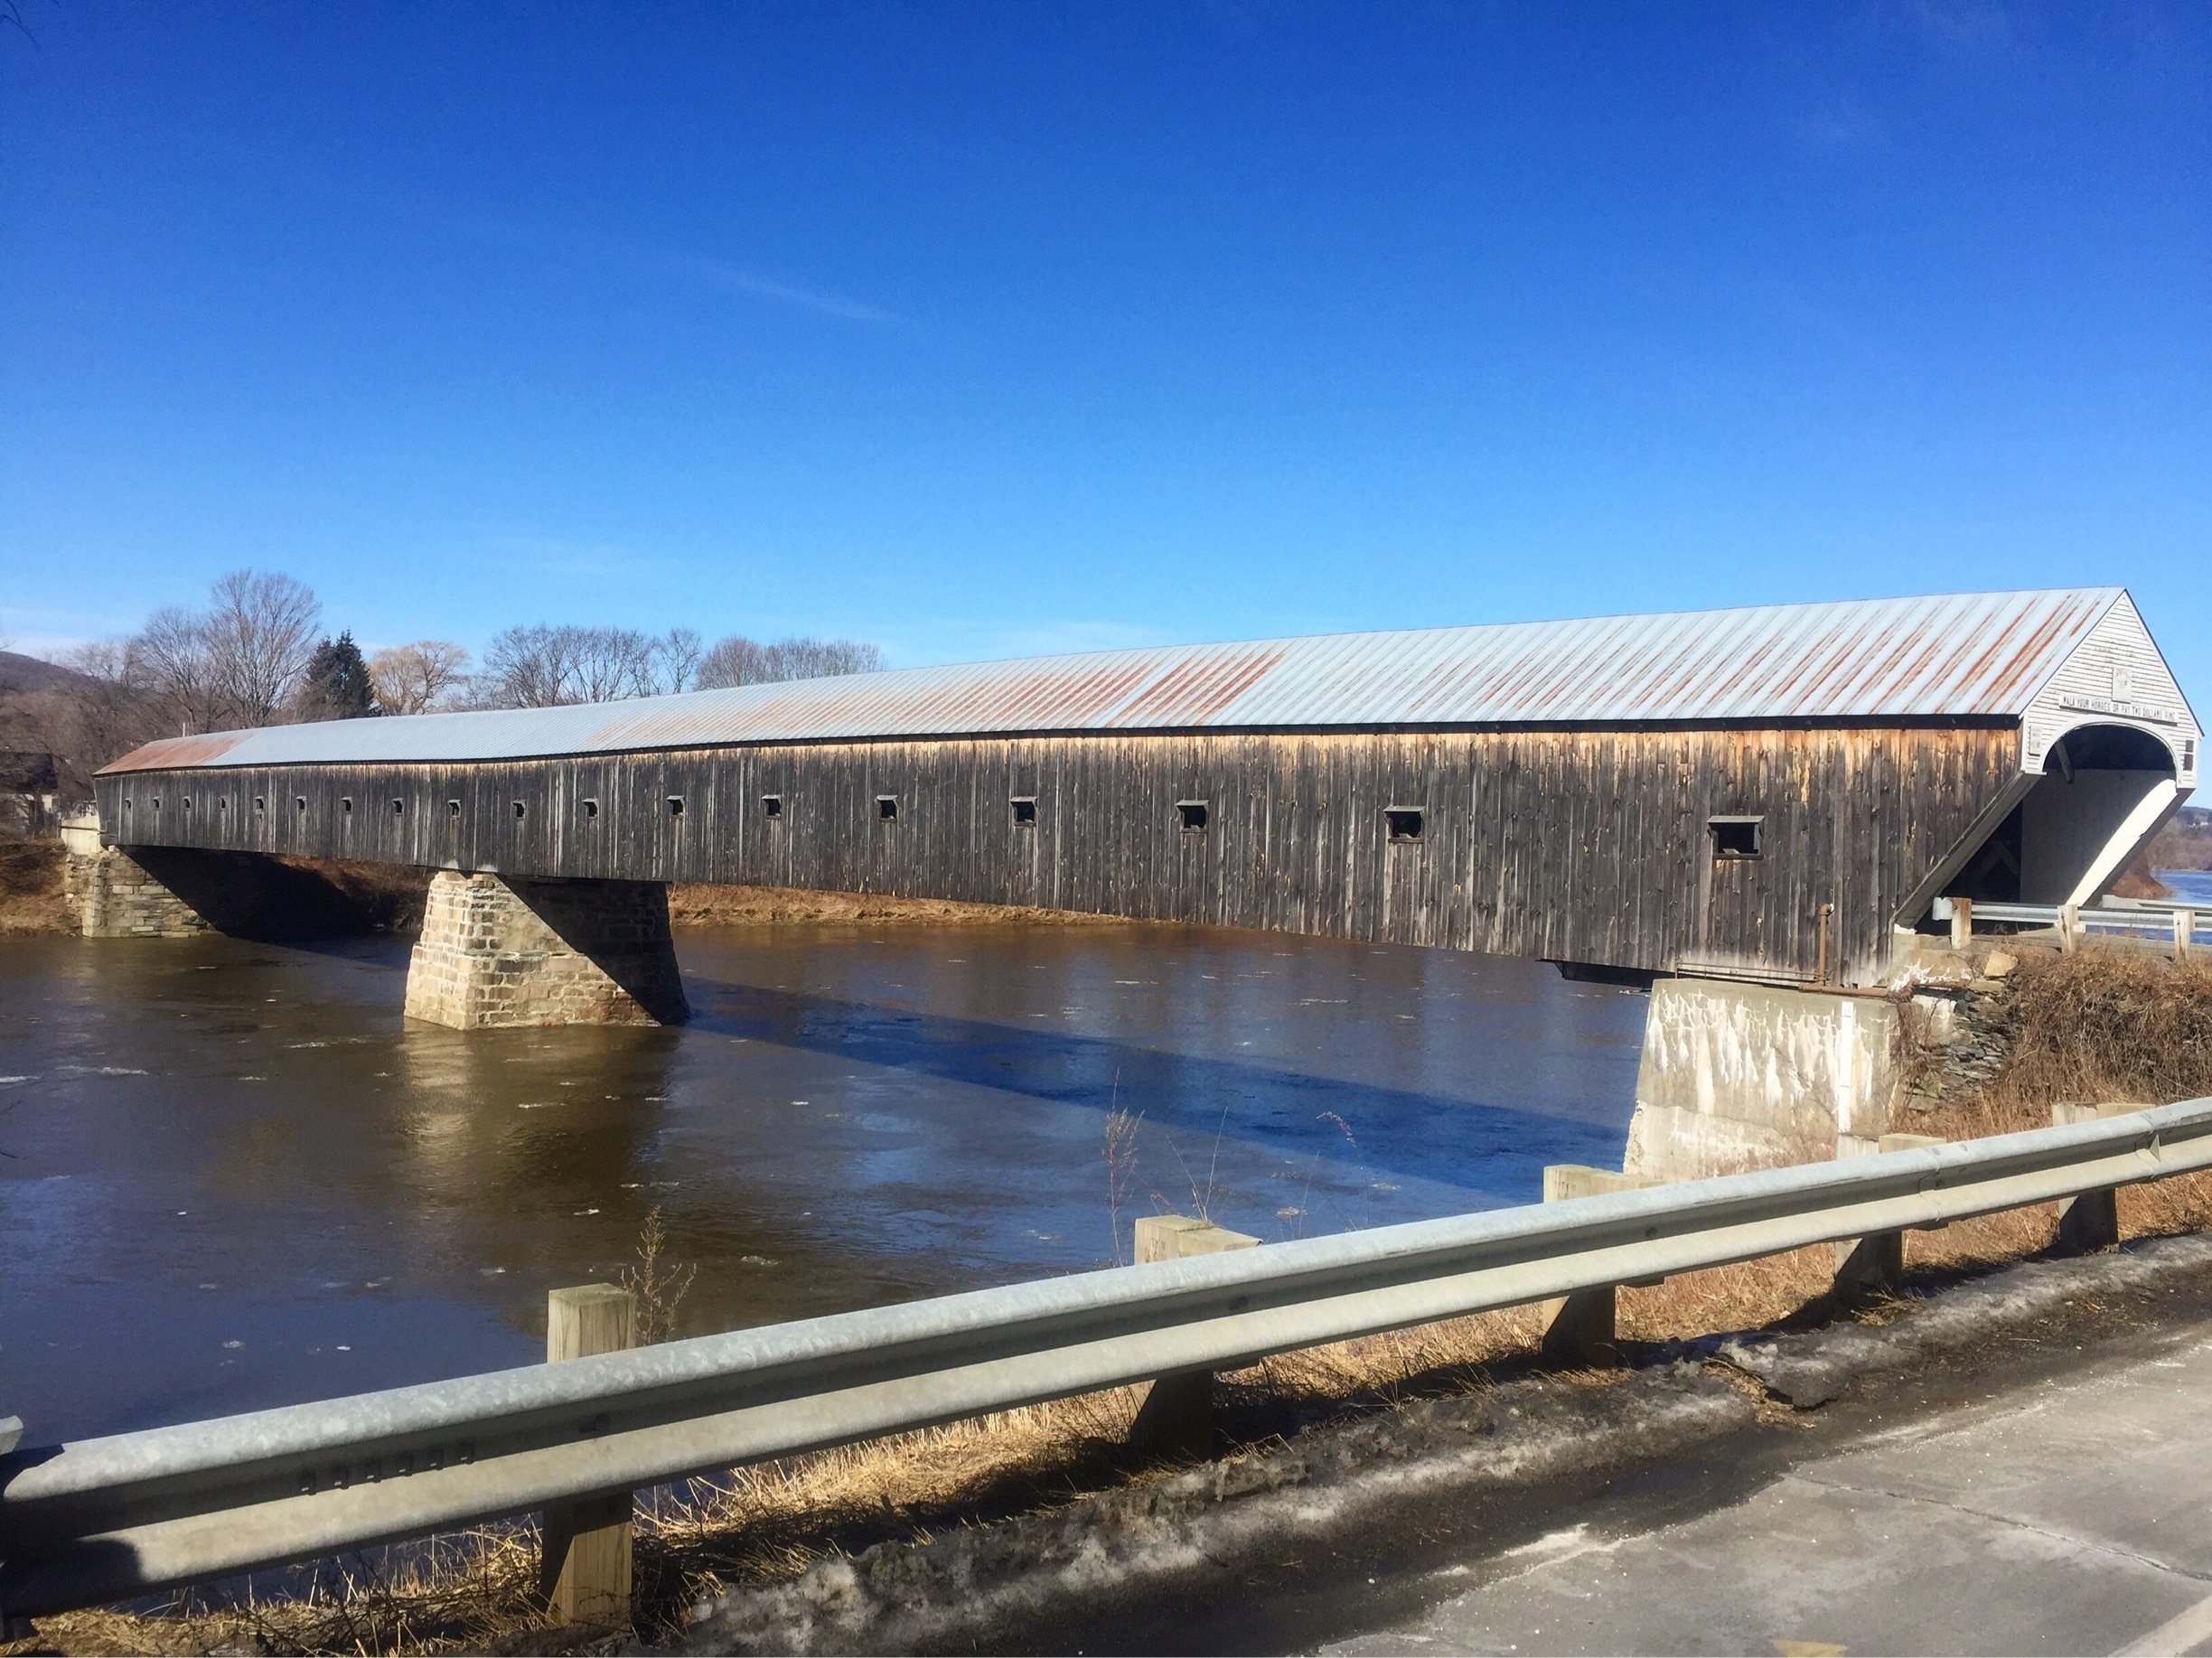 Held the title for longest covered bridge in the US until 2008! Jumps the CT River between VT and NH